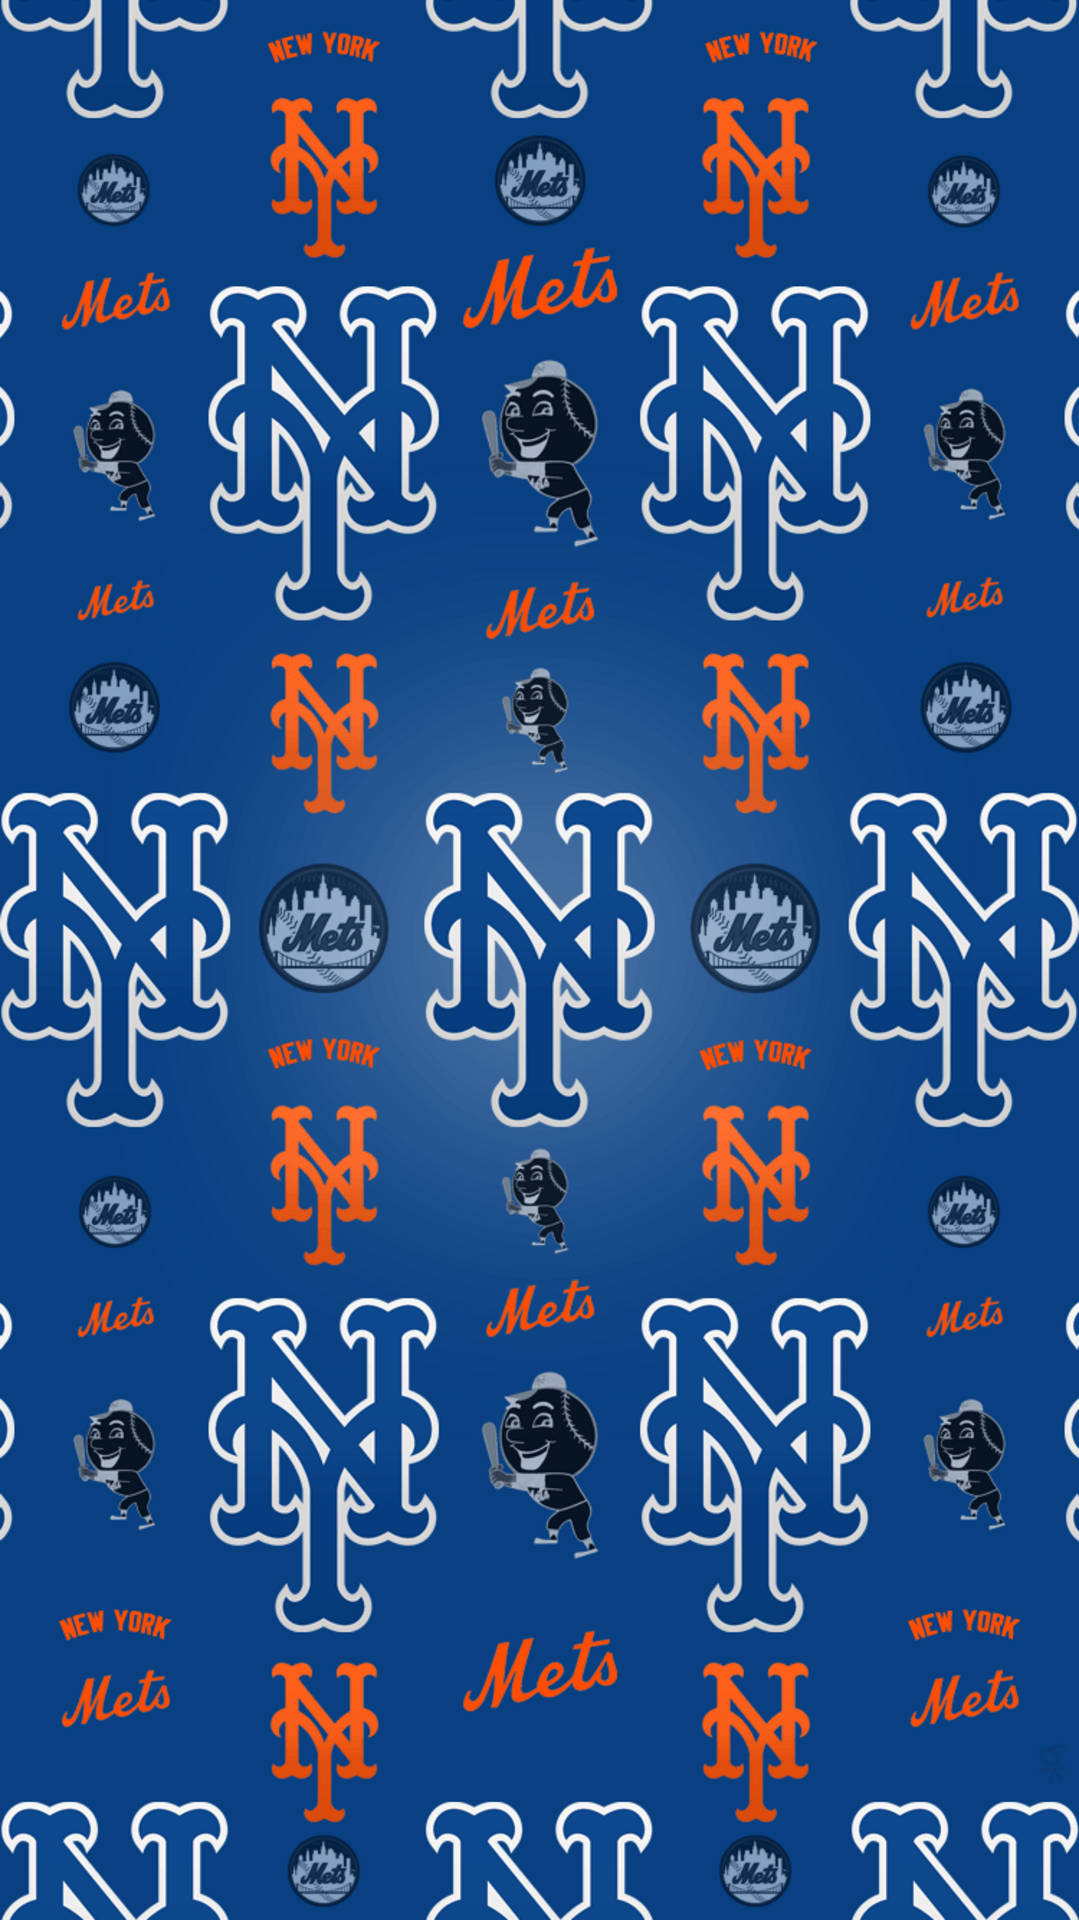 I made some mets Phone wallpapers : r/NewYorkMets